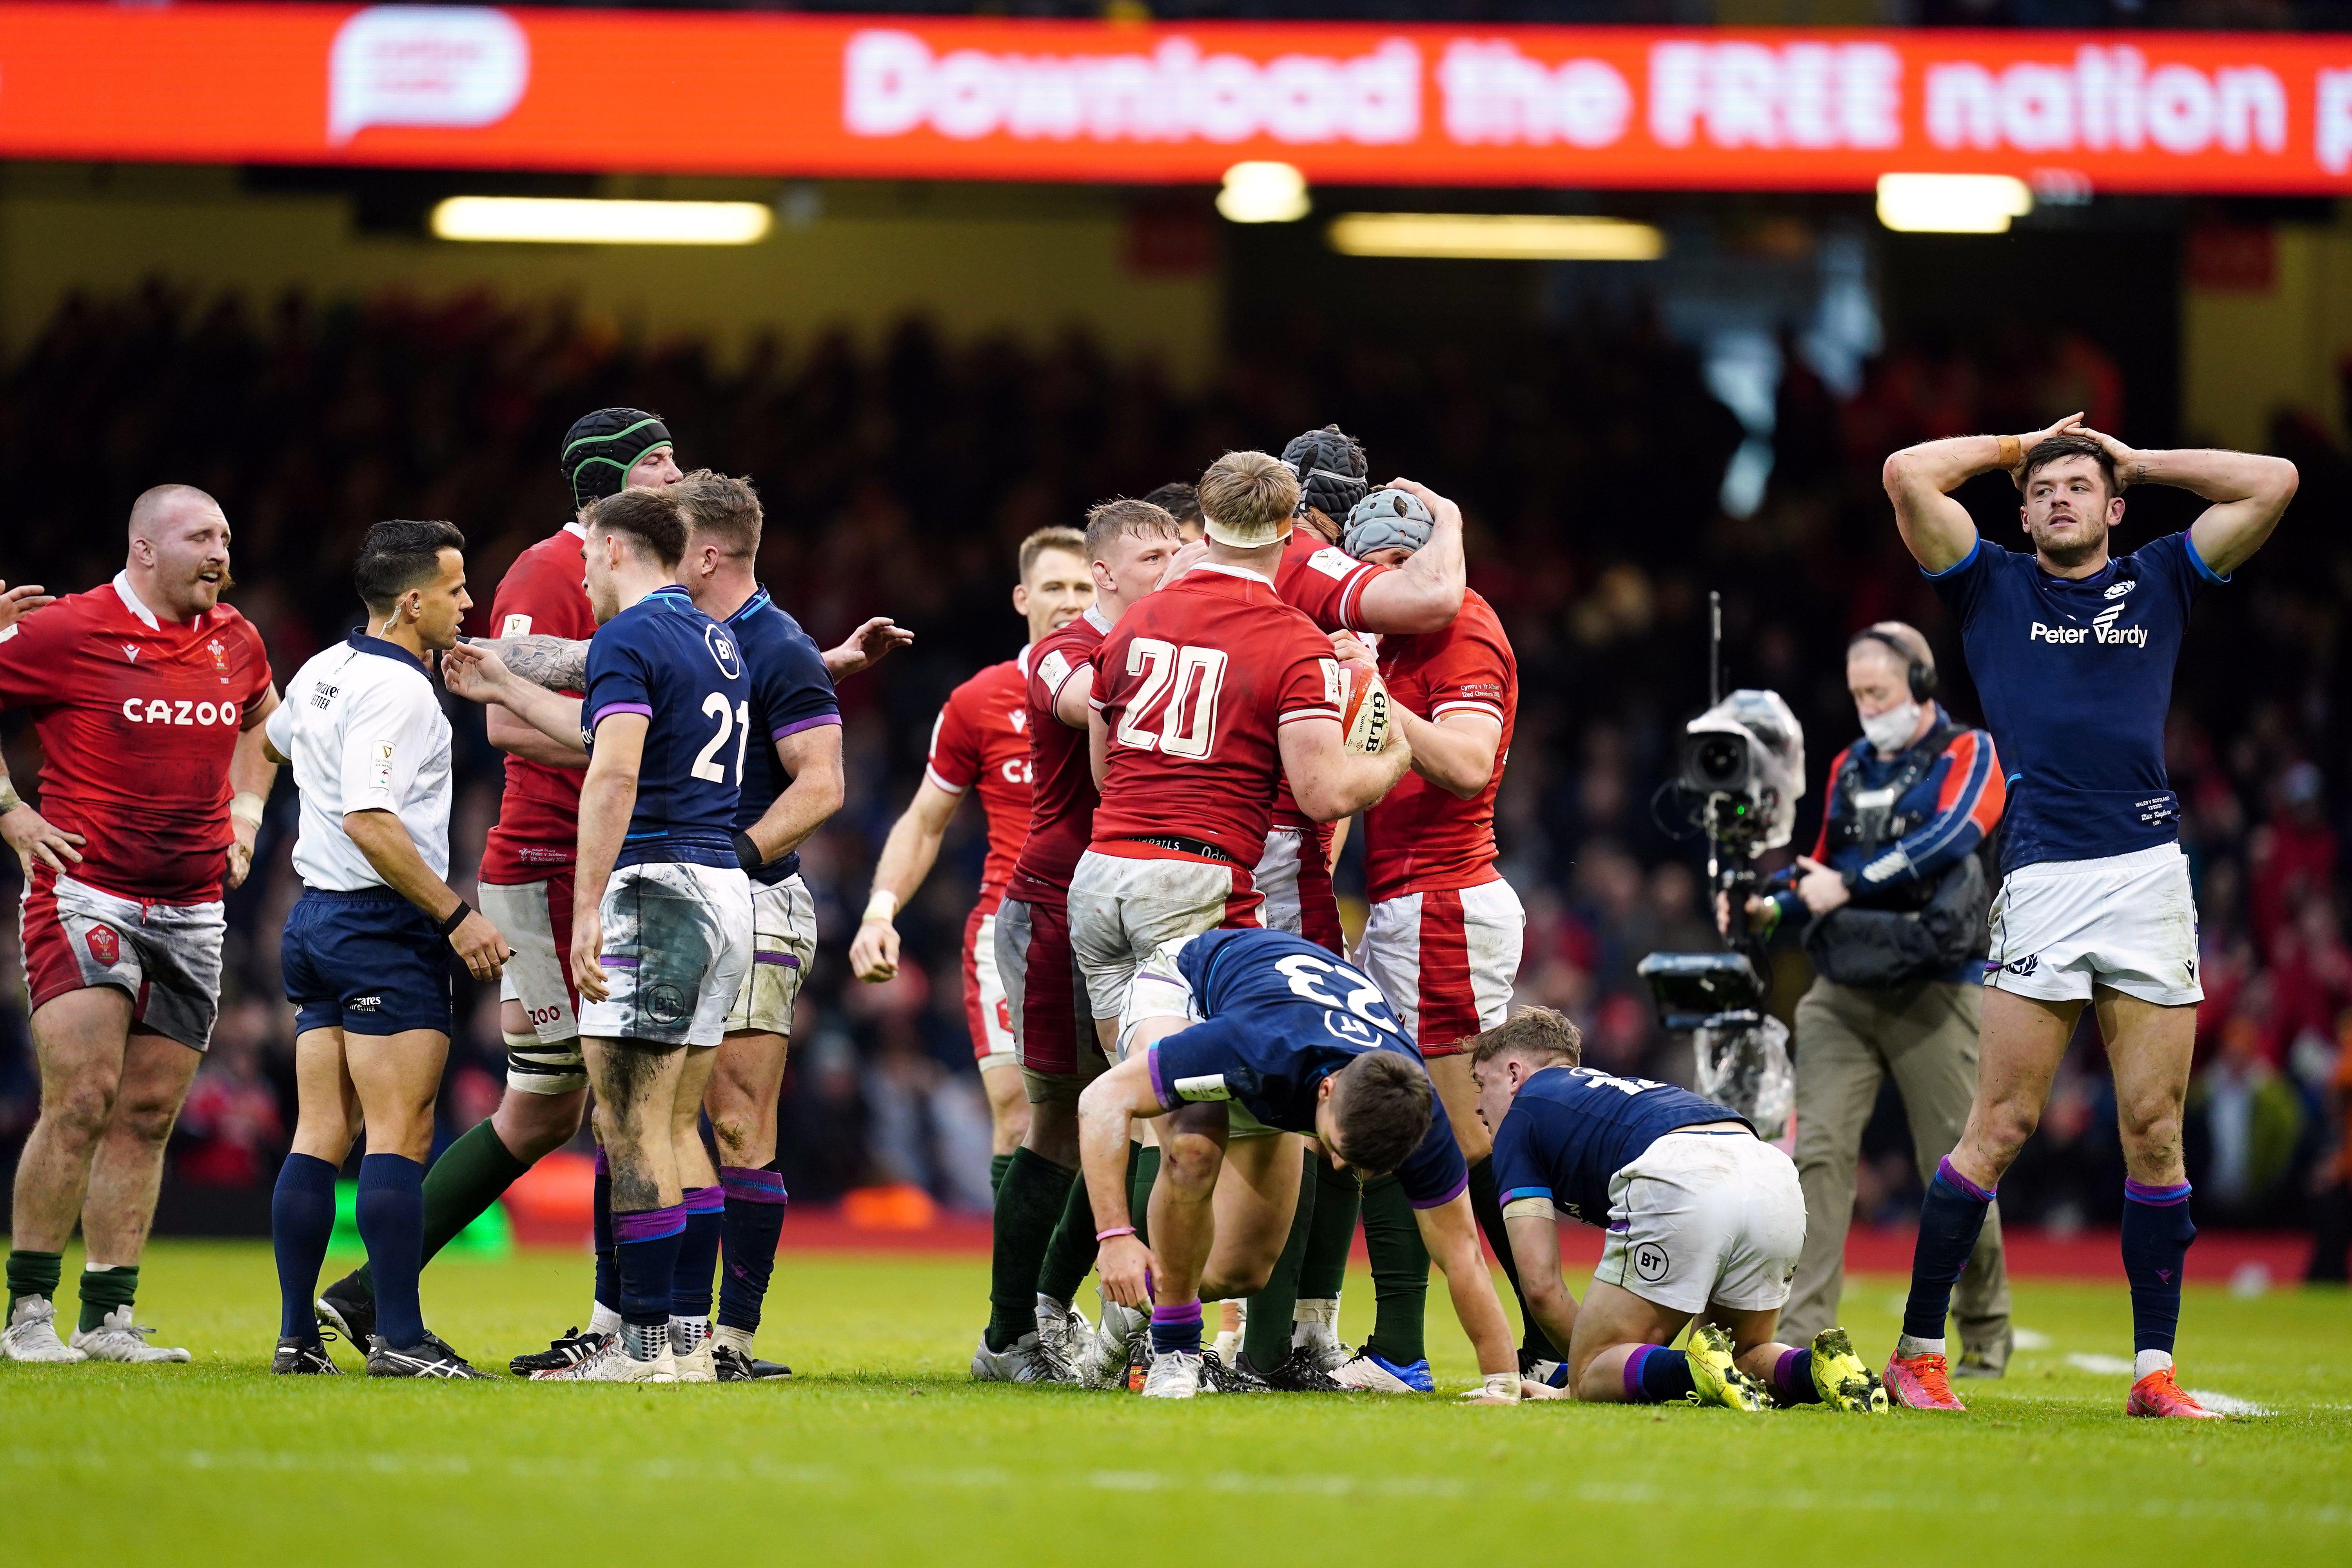 Wales recovered impressively from a 29-7 loss to Ireland to defeat the Scots